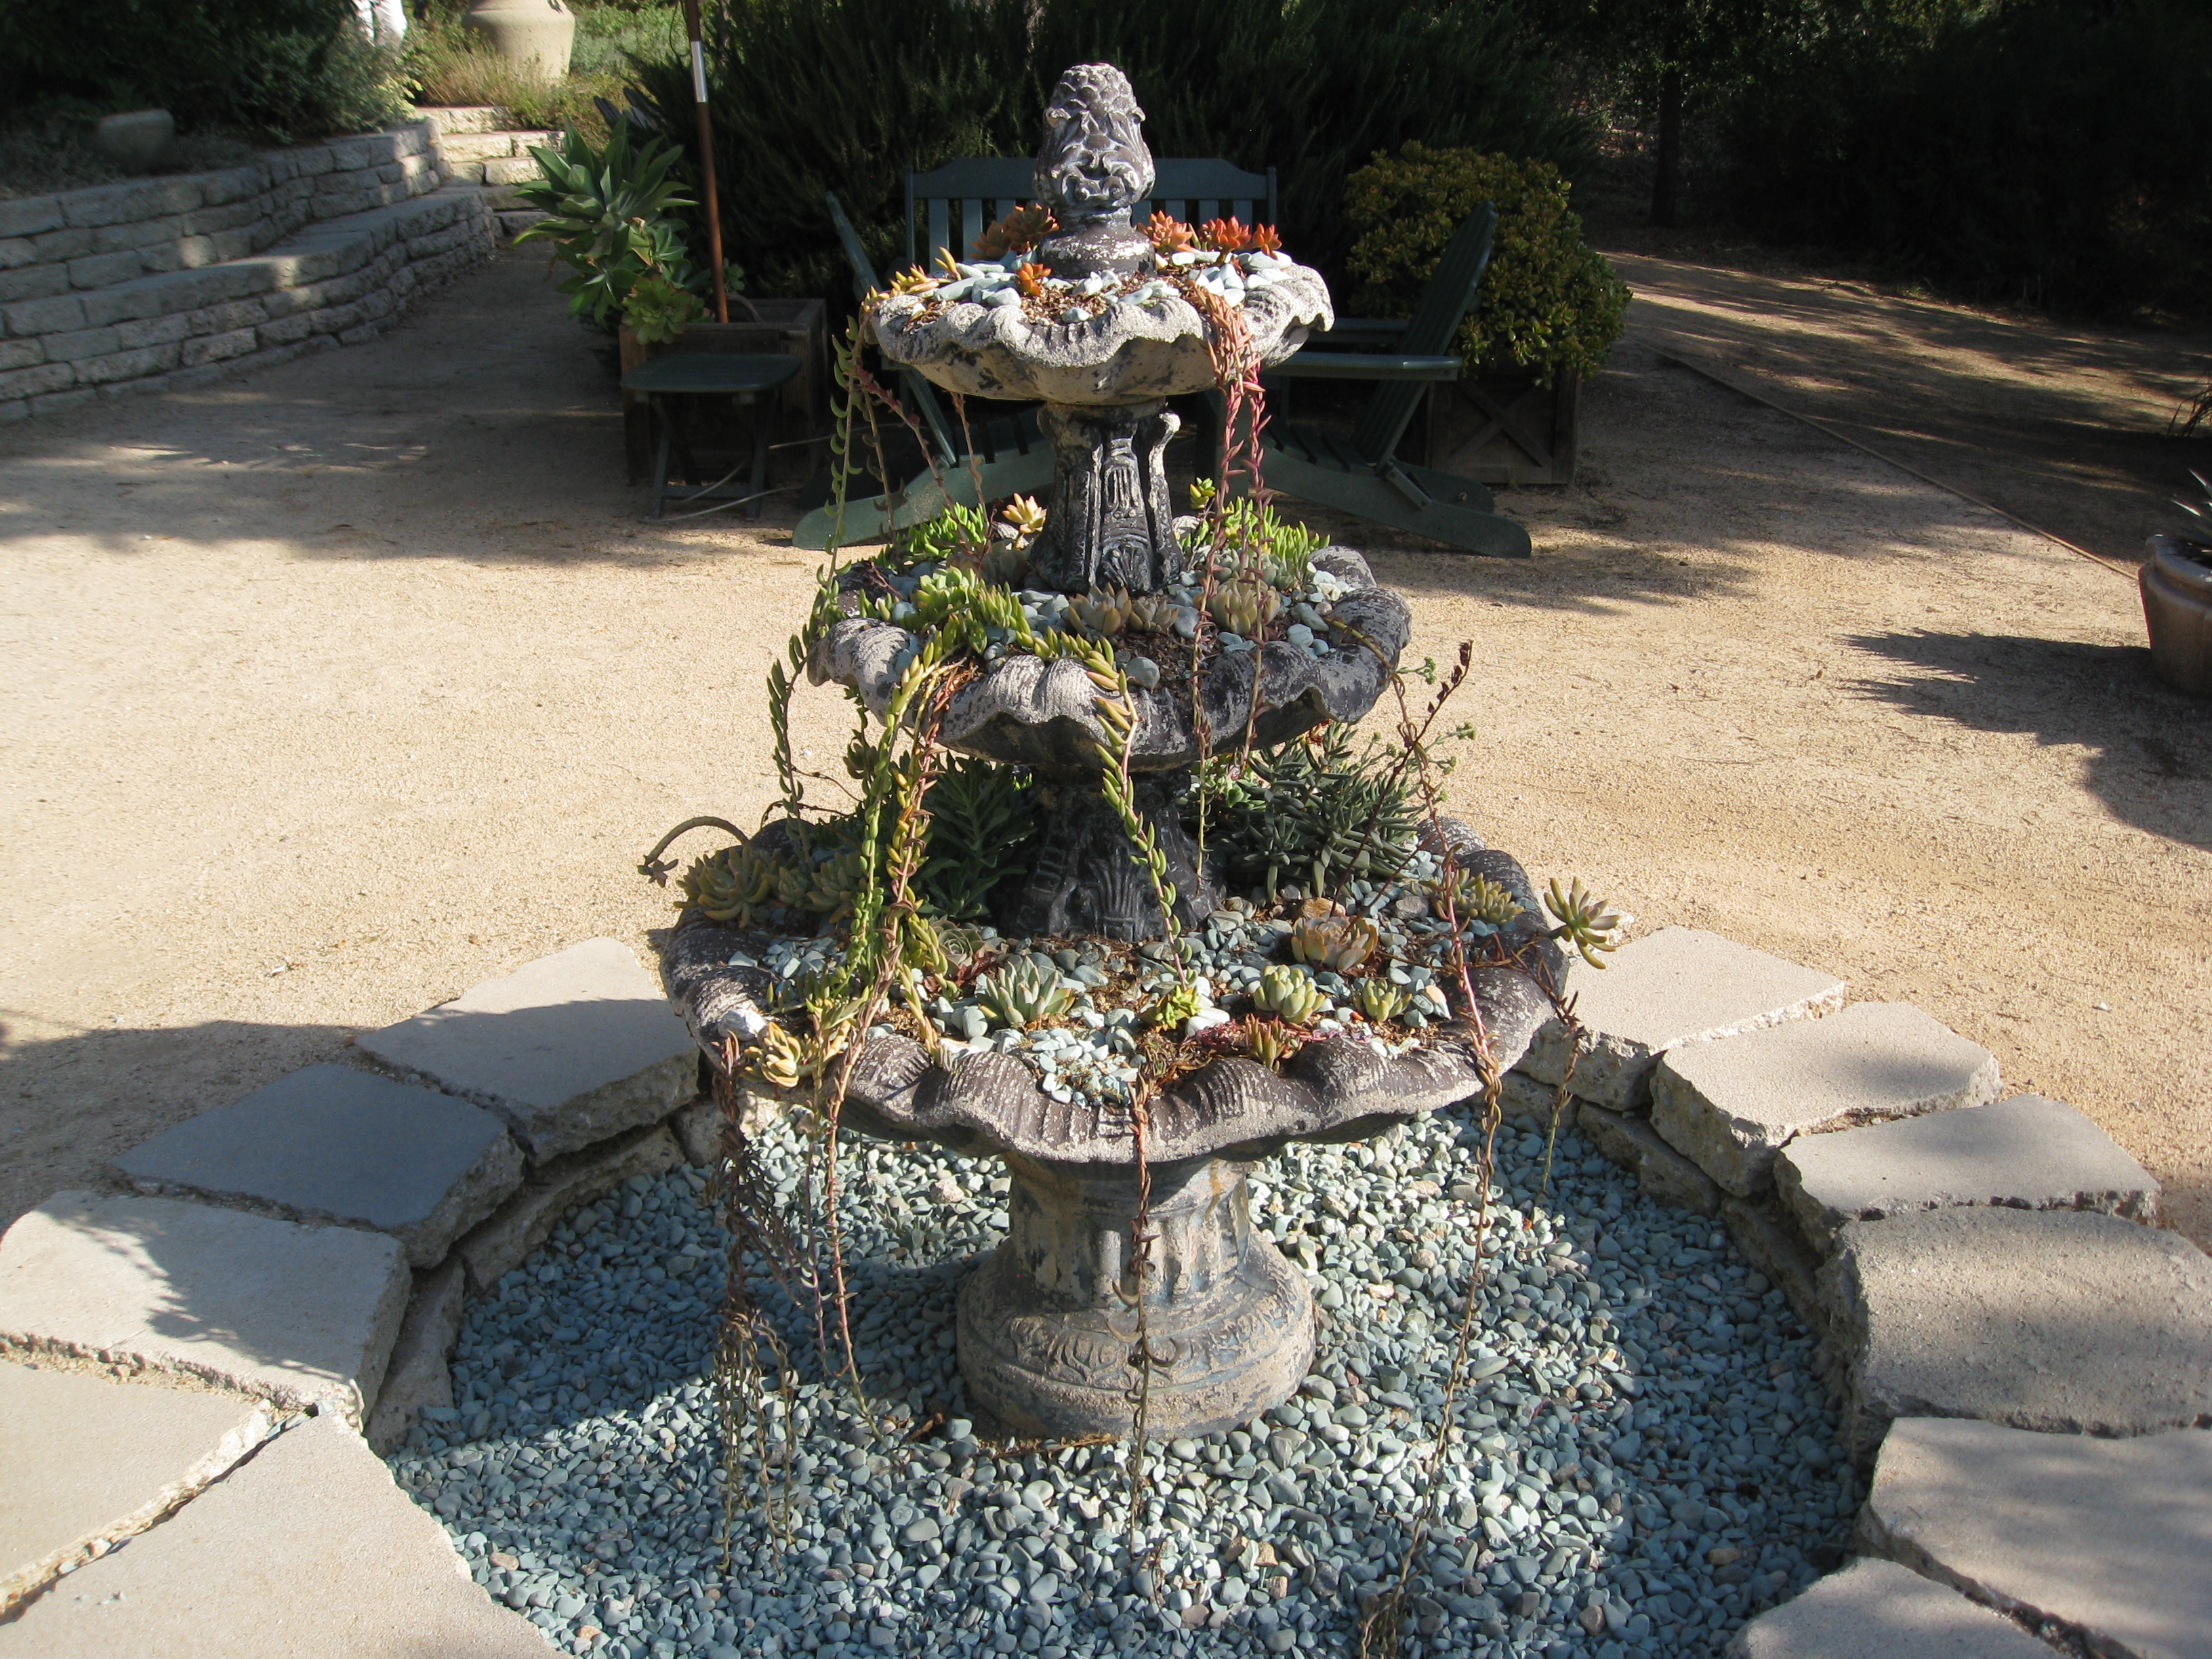 What a great use for a fountain in a drought!